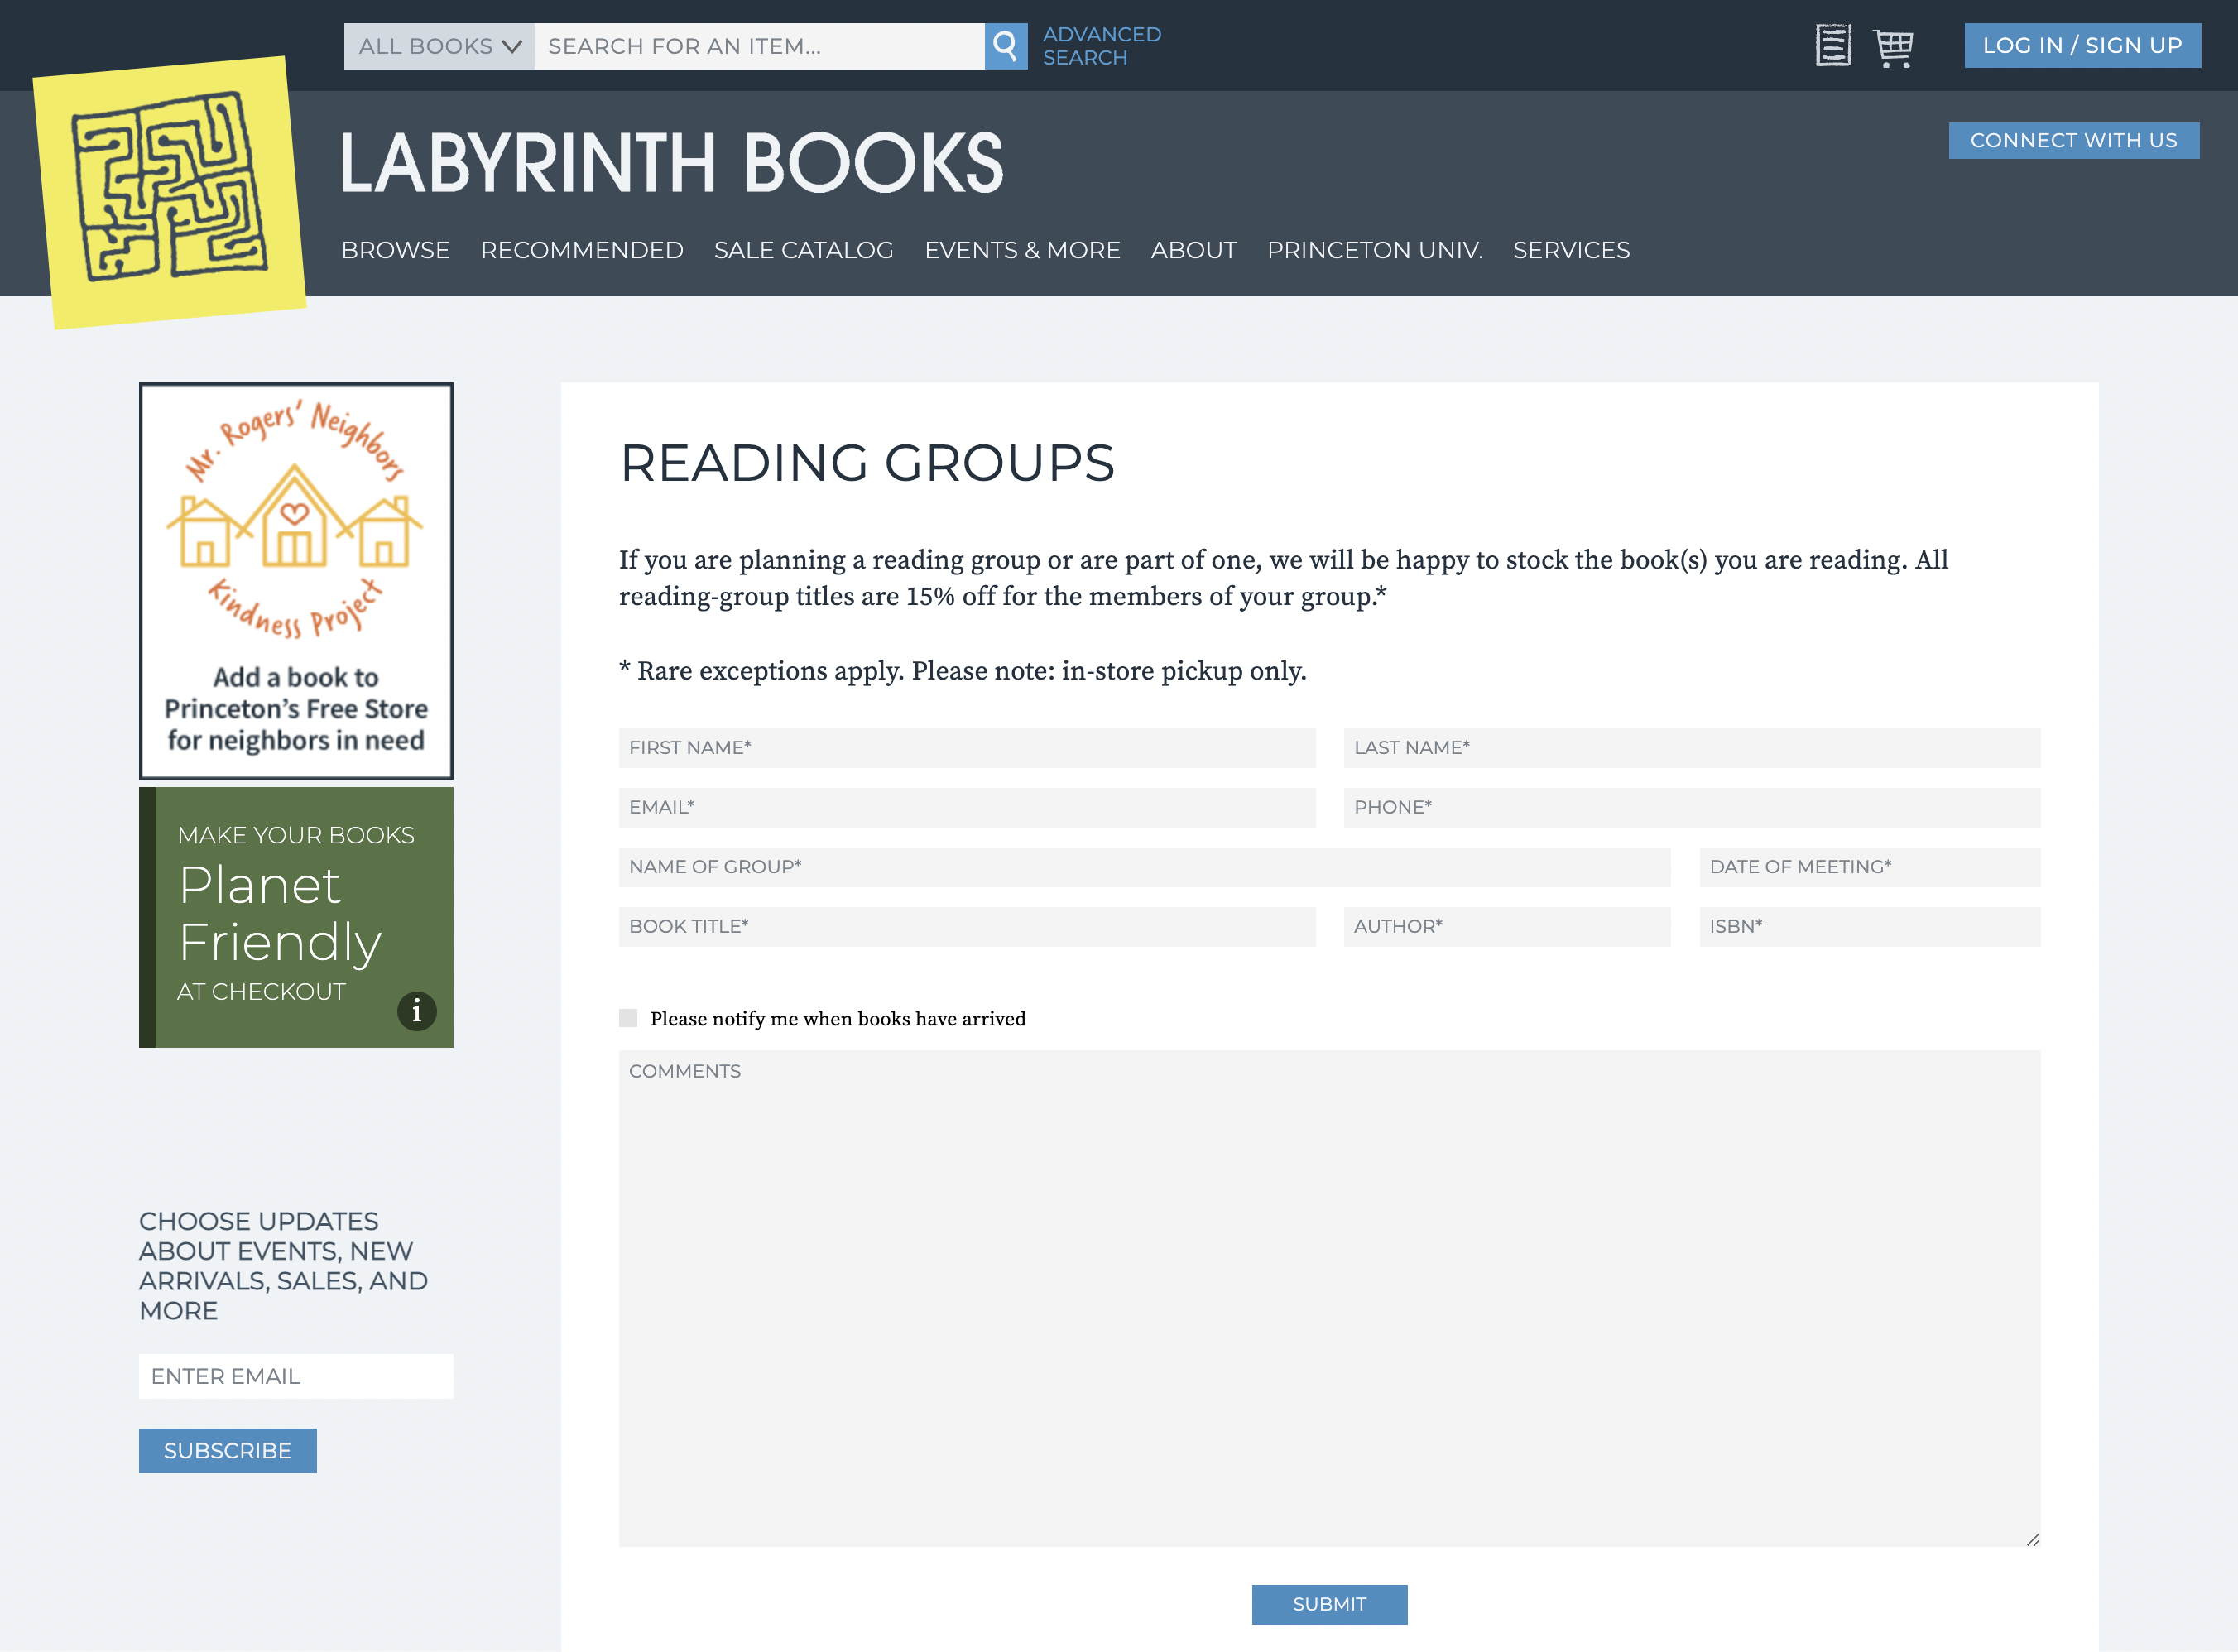 Reading groups form